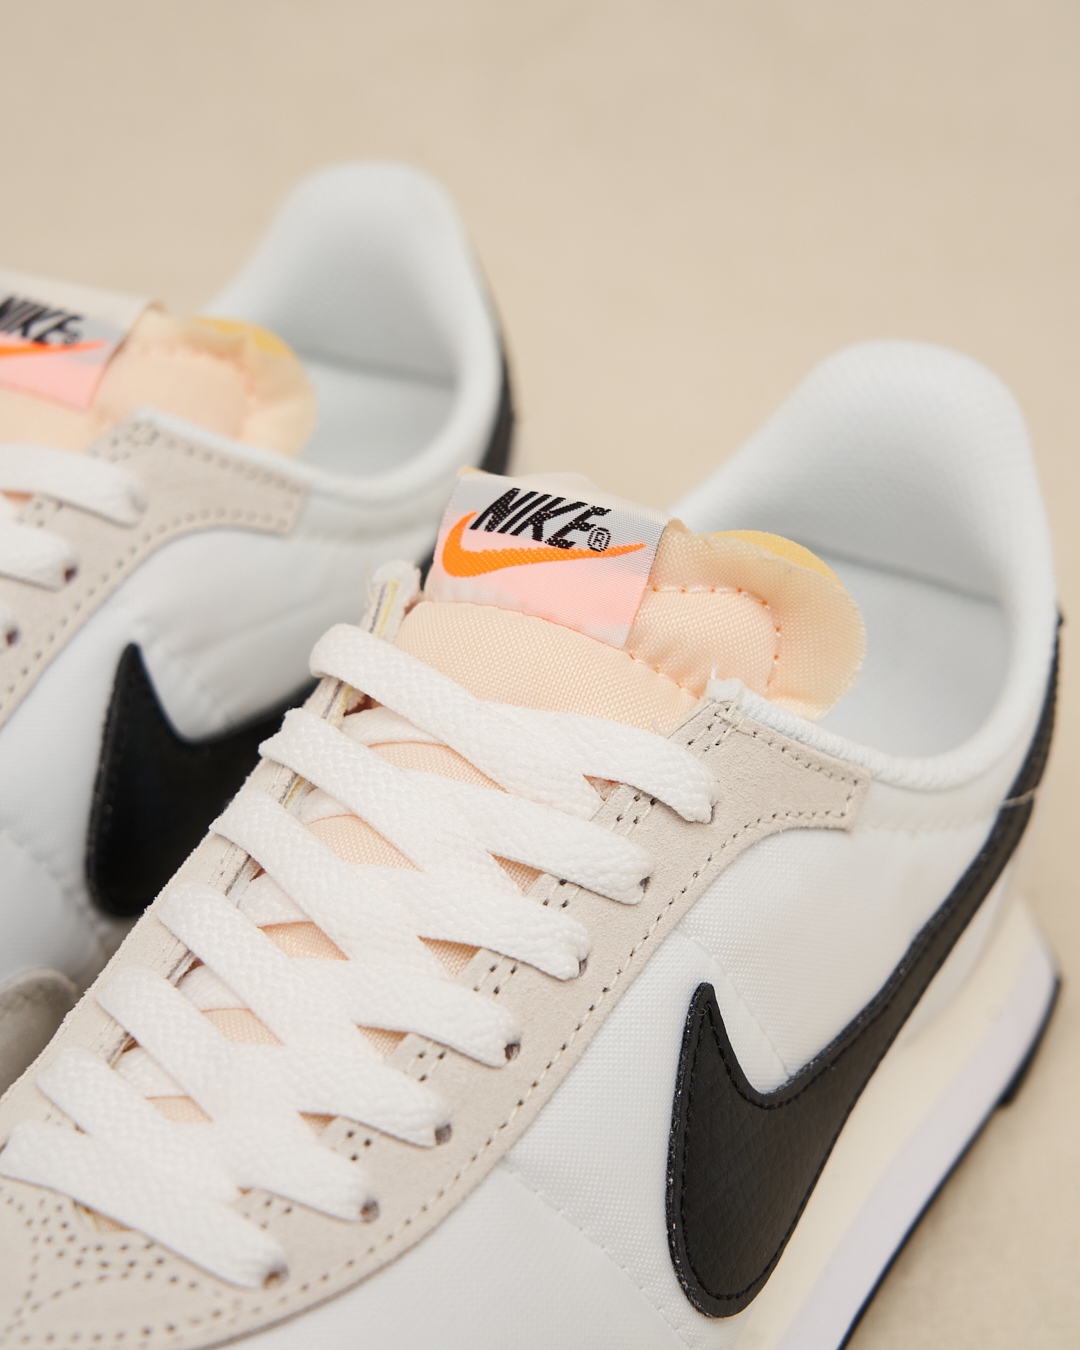 Allike Store on Twitter: "NIKE WAFFLE TRAINER 2 (WHITE / BLACK) / EU 38,5 -  47,5 / €99,90 | https://t.co/Kd5nzF0t8R An updated version of a classic:  The Waffle Trainer 2 is now